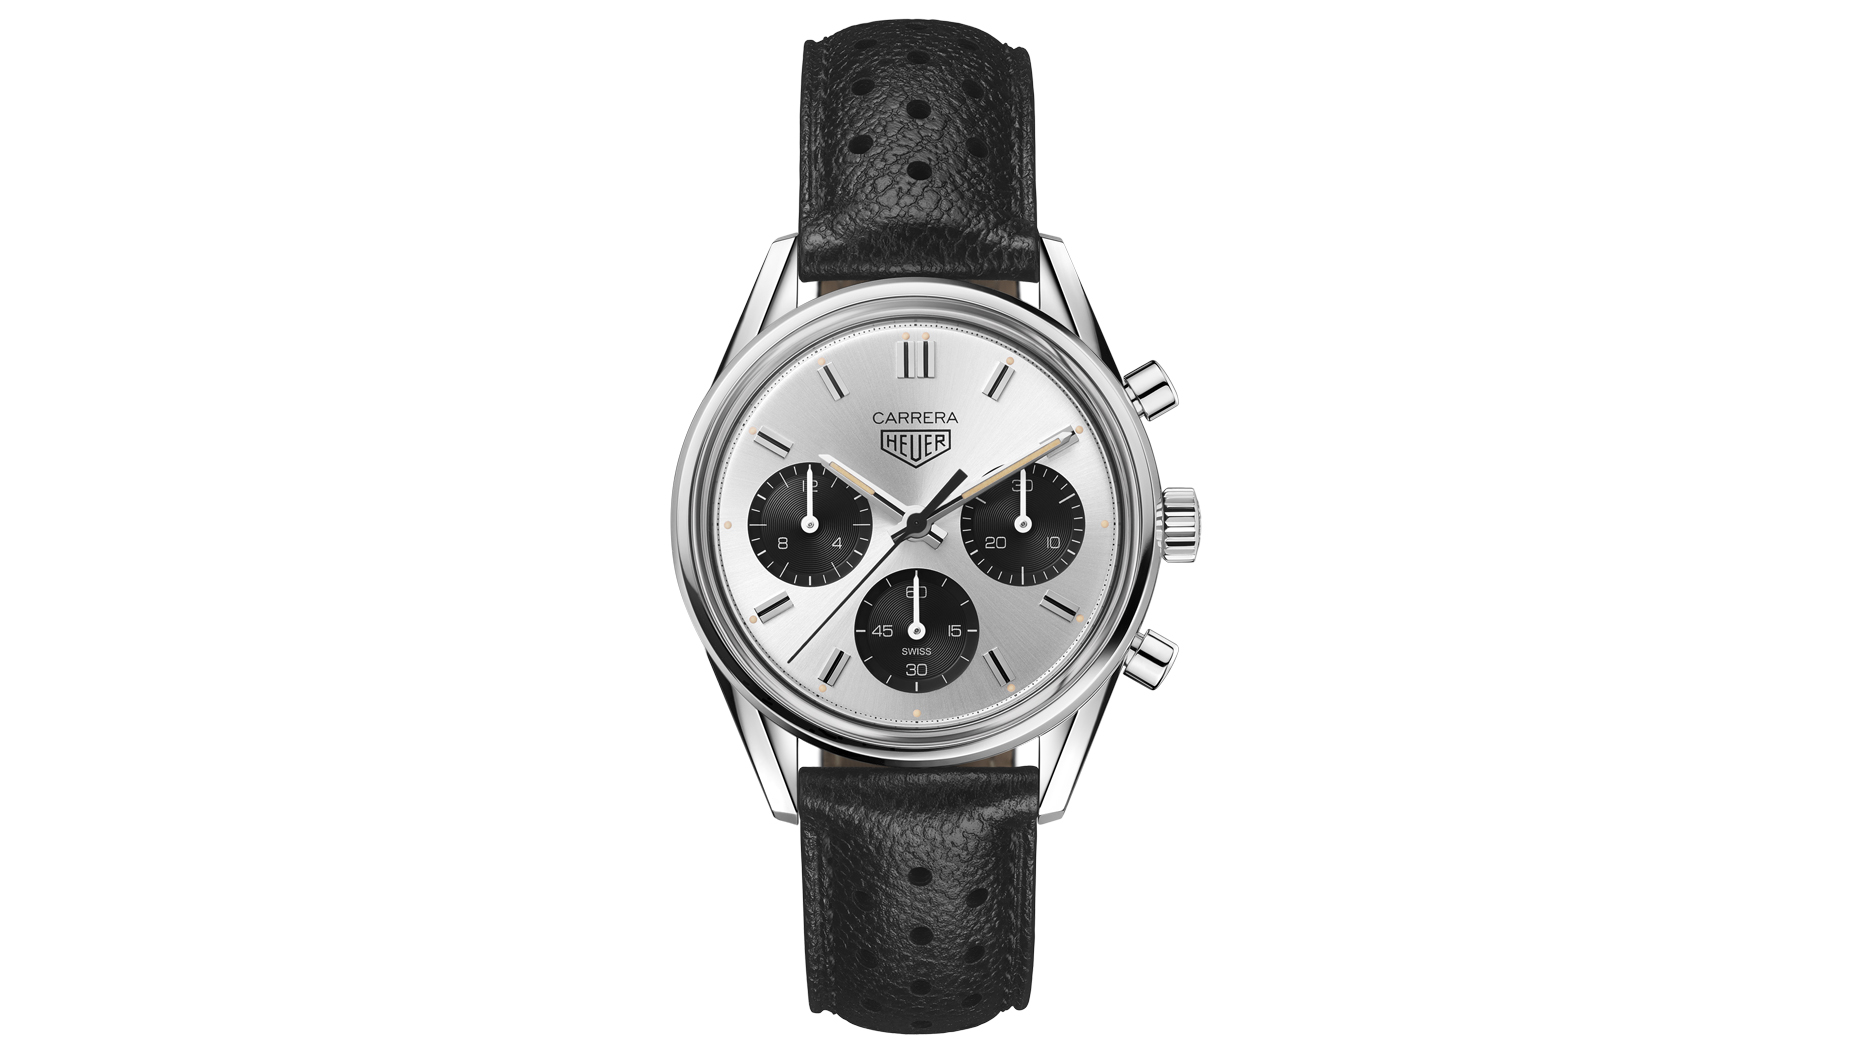 LVMH Watch Week: See 6 New Watches From TAG Heuer